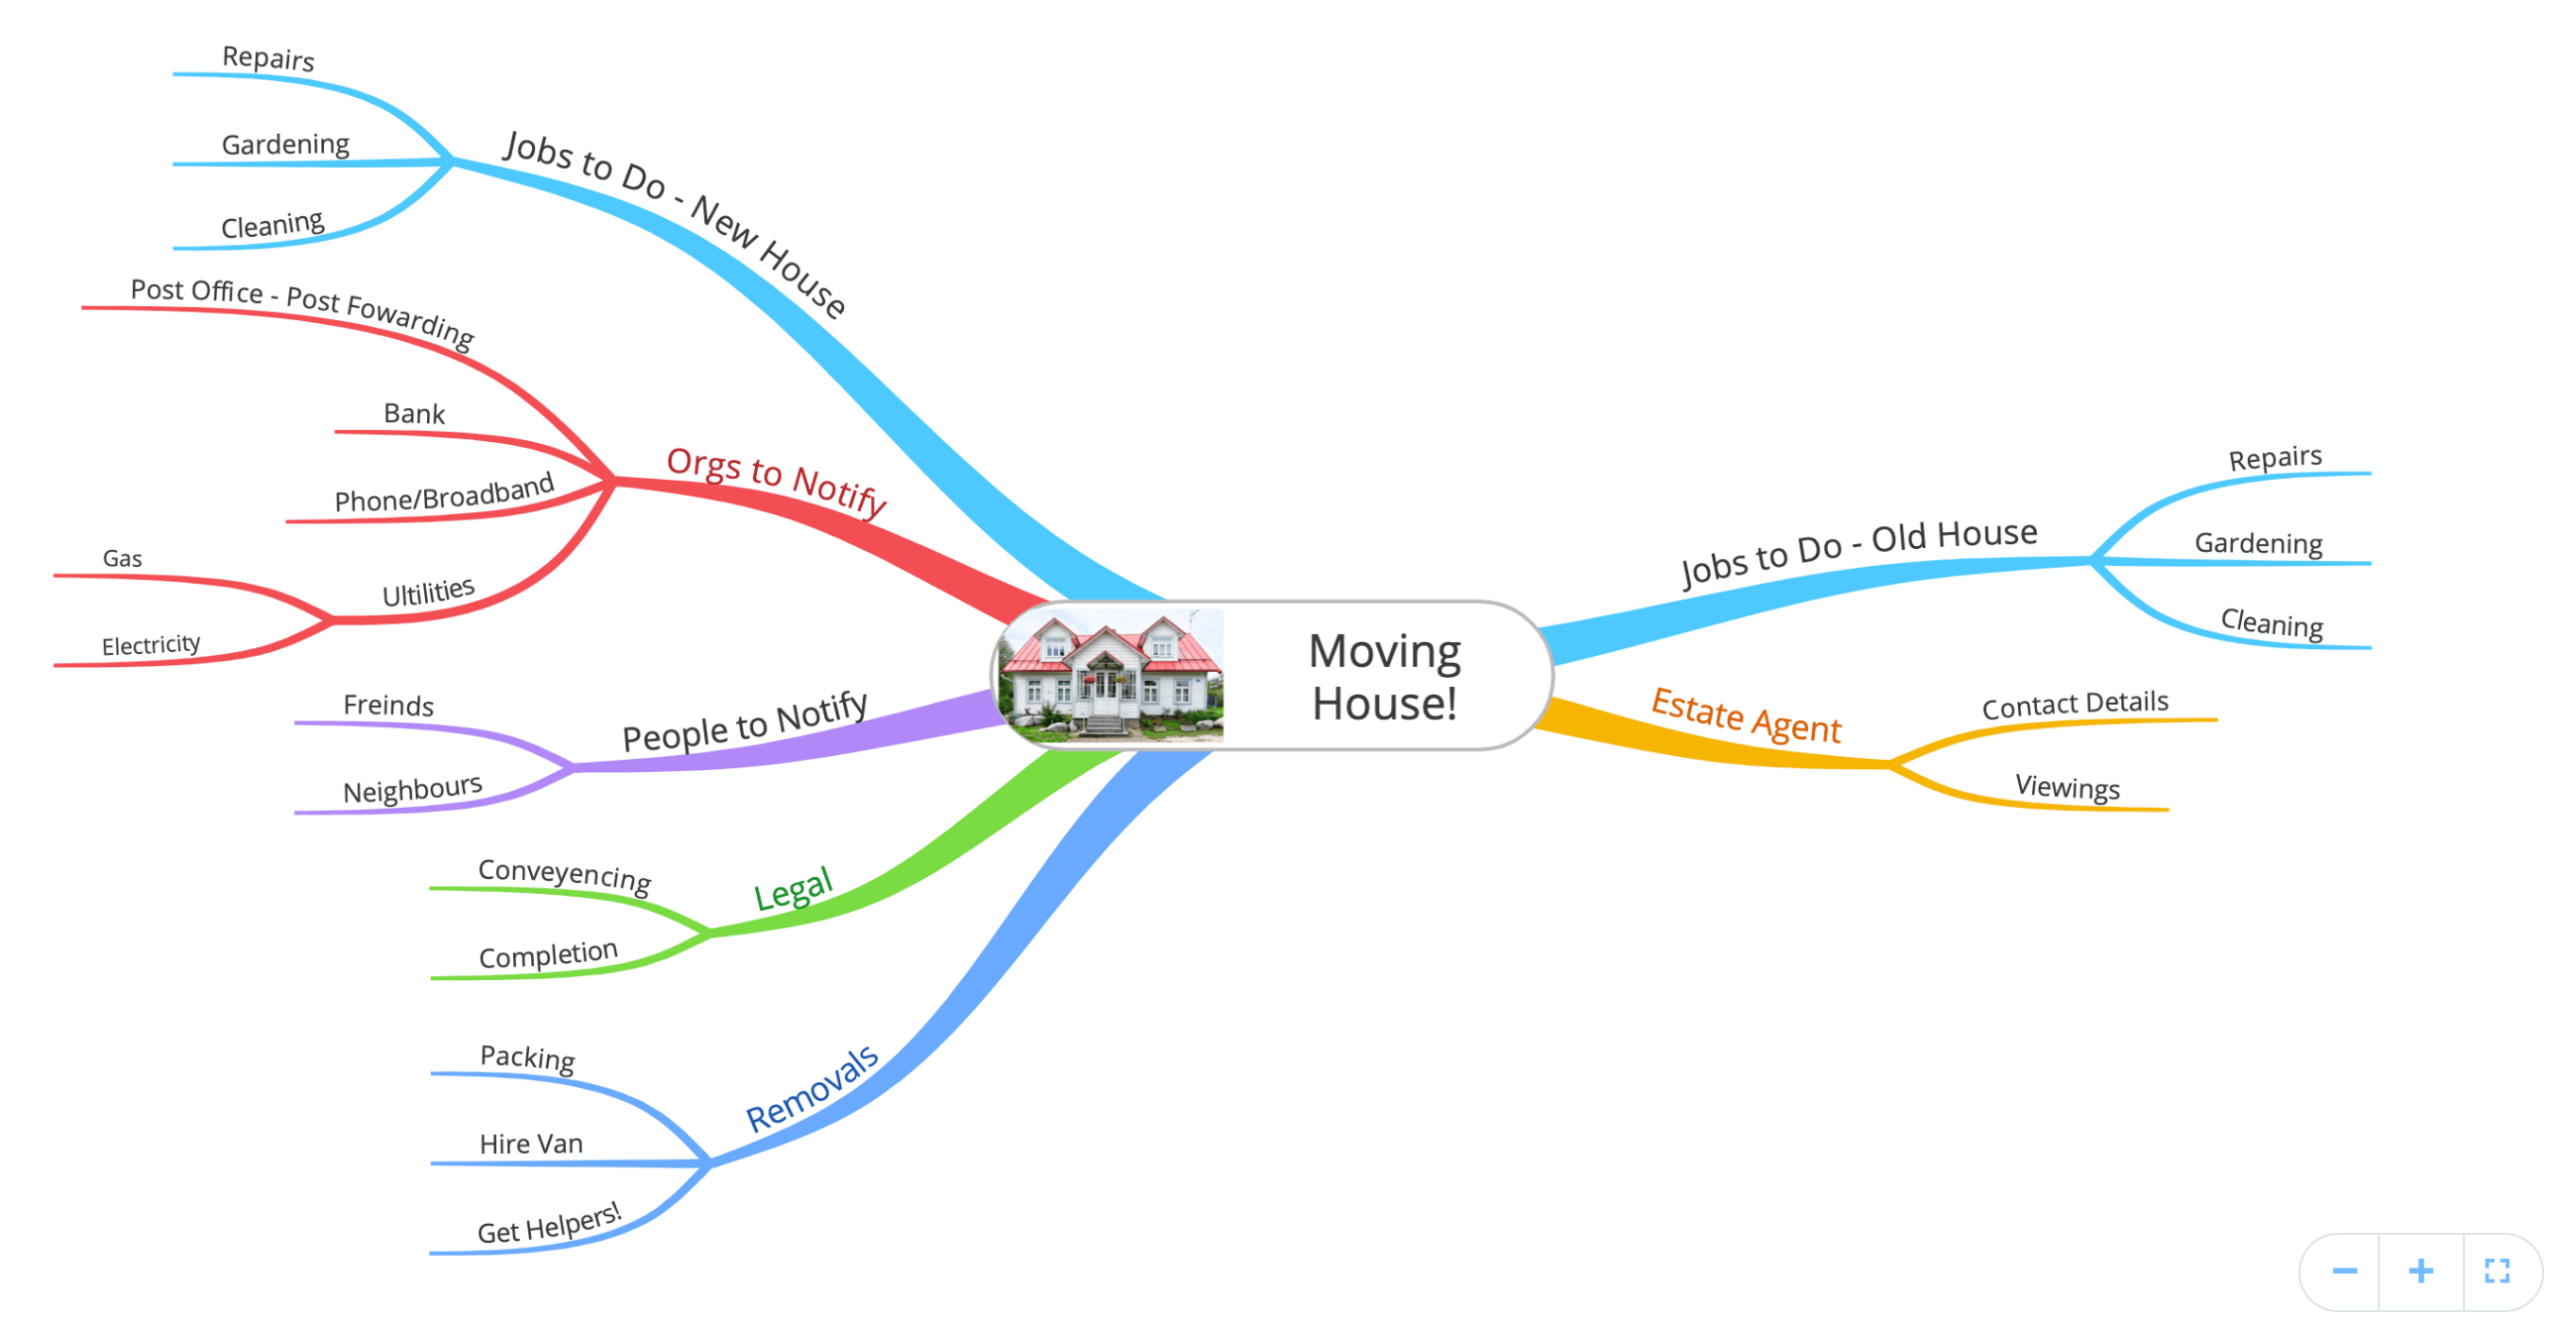 Moving House mind map made in Ayoa